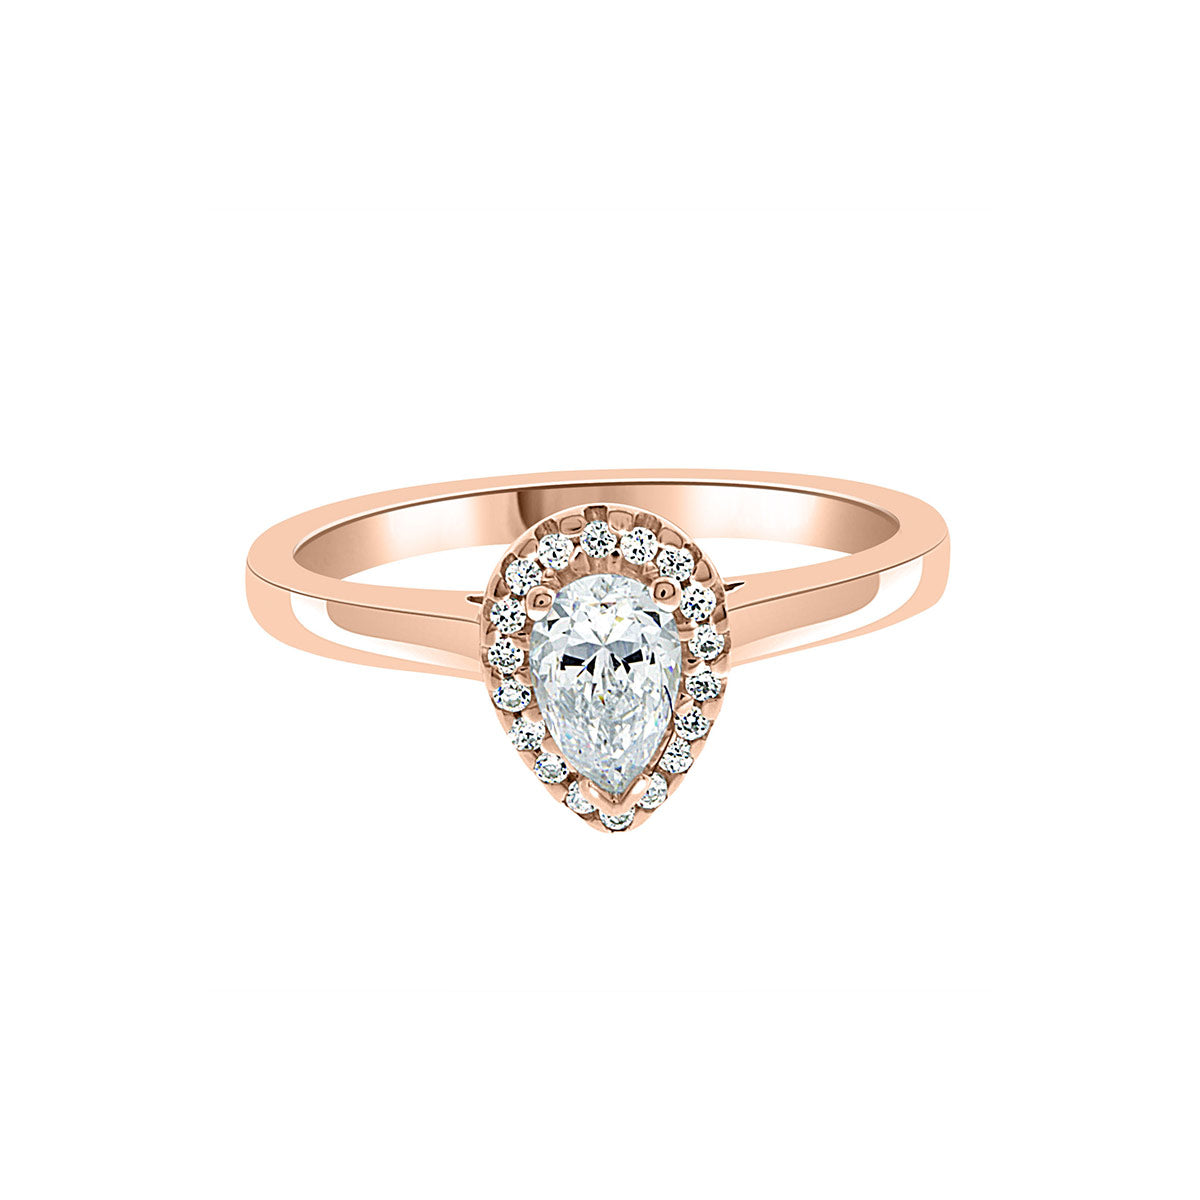 Vintage Engagement Ring with Pear Shape Diamond in rose gold, laying flat with a white background